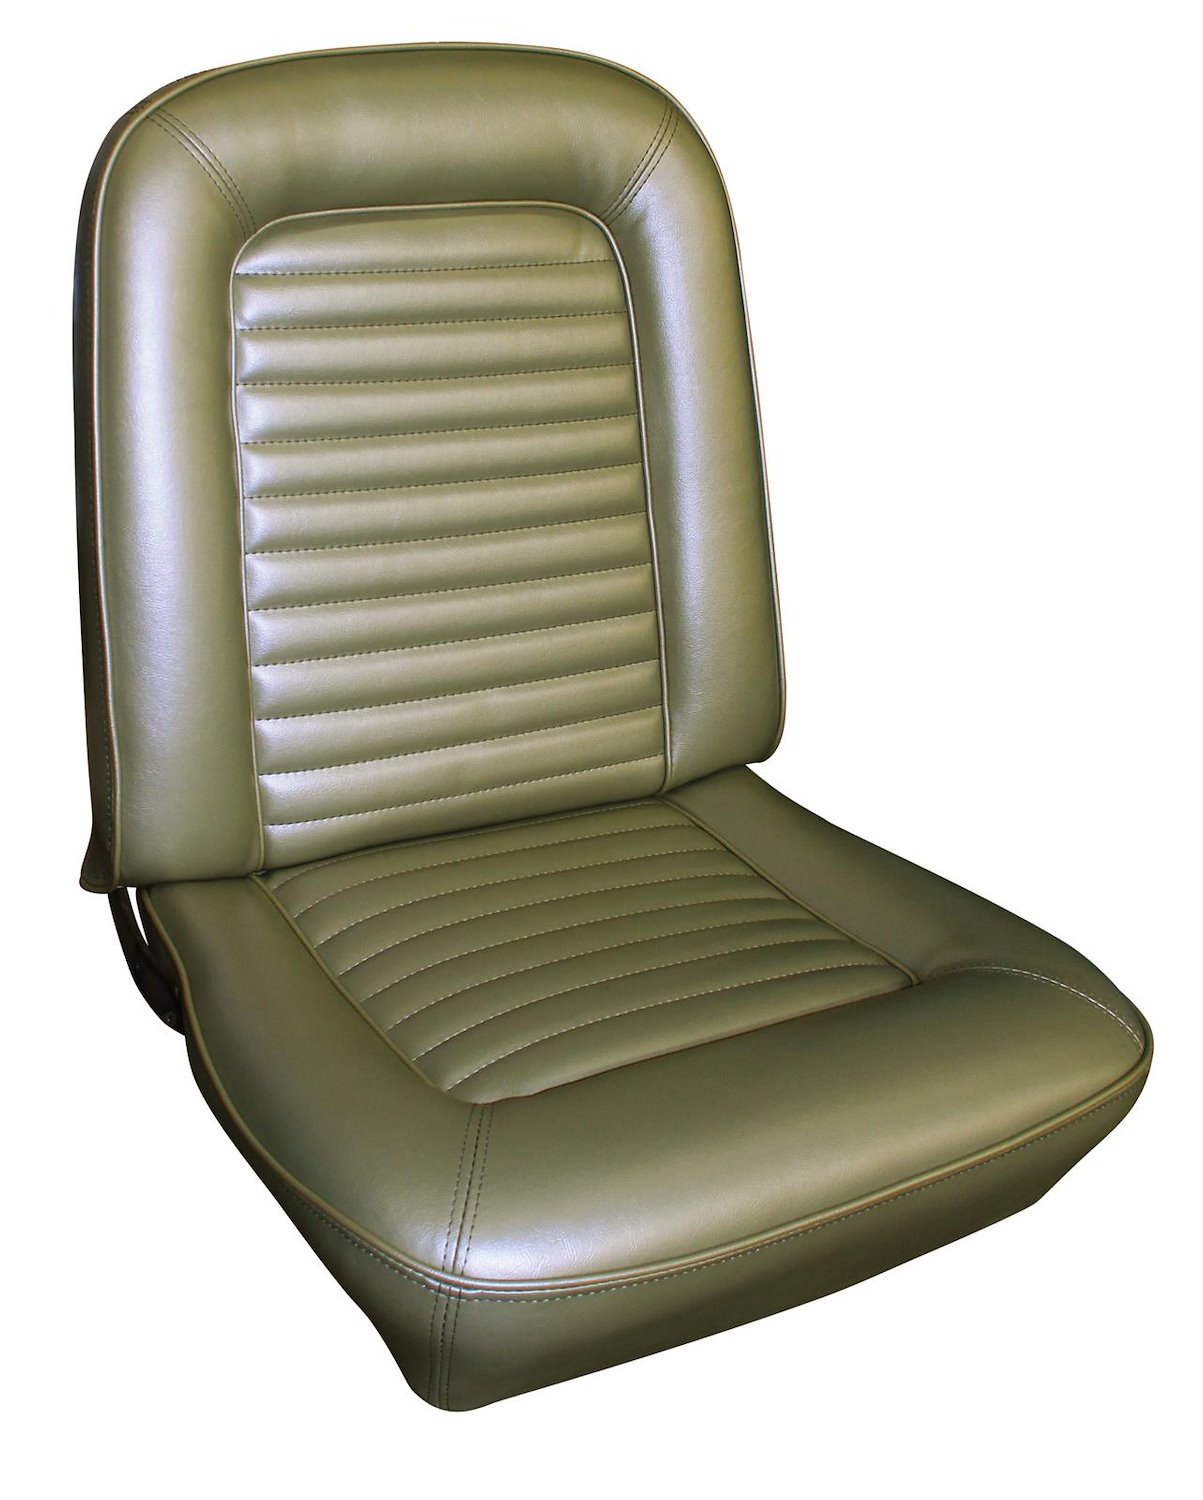 1970 Ford Mustang Convertible Deluxe Interior Front Bucket and Rear Bench Seat Upholstery Set